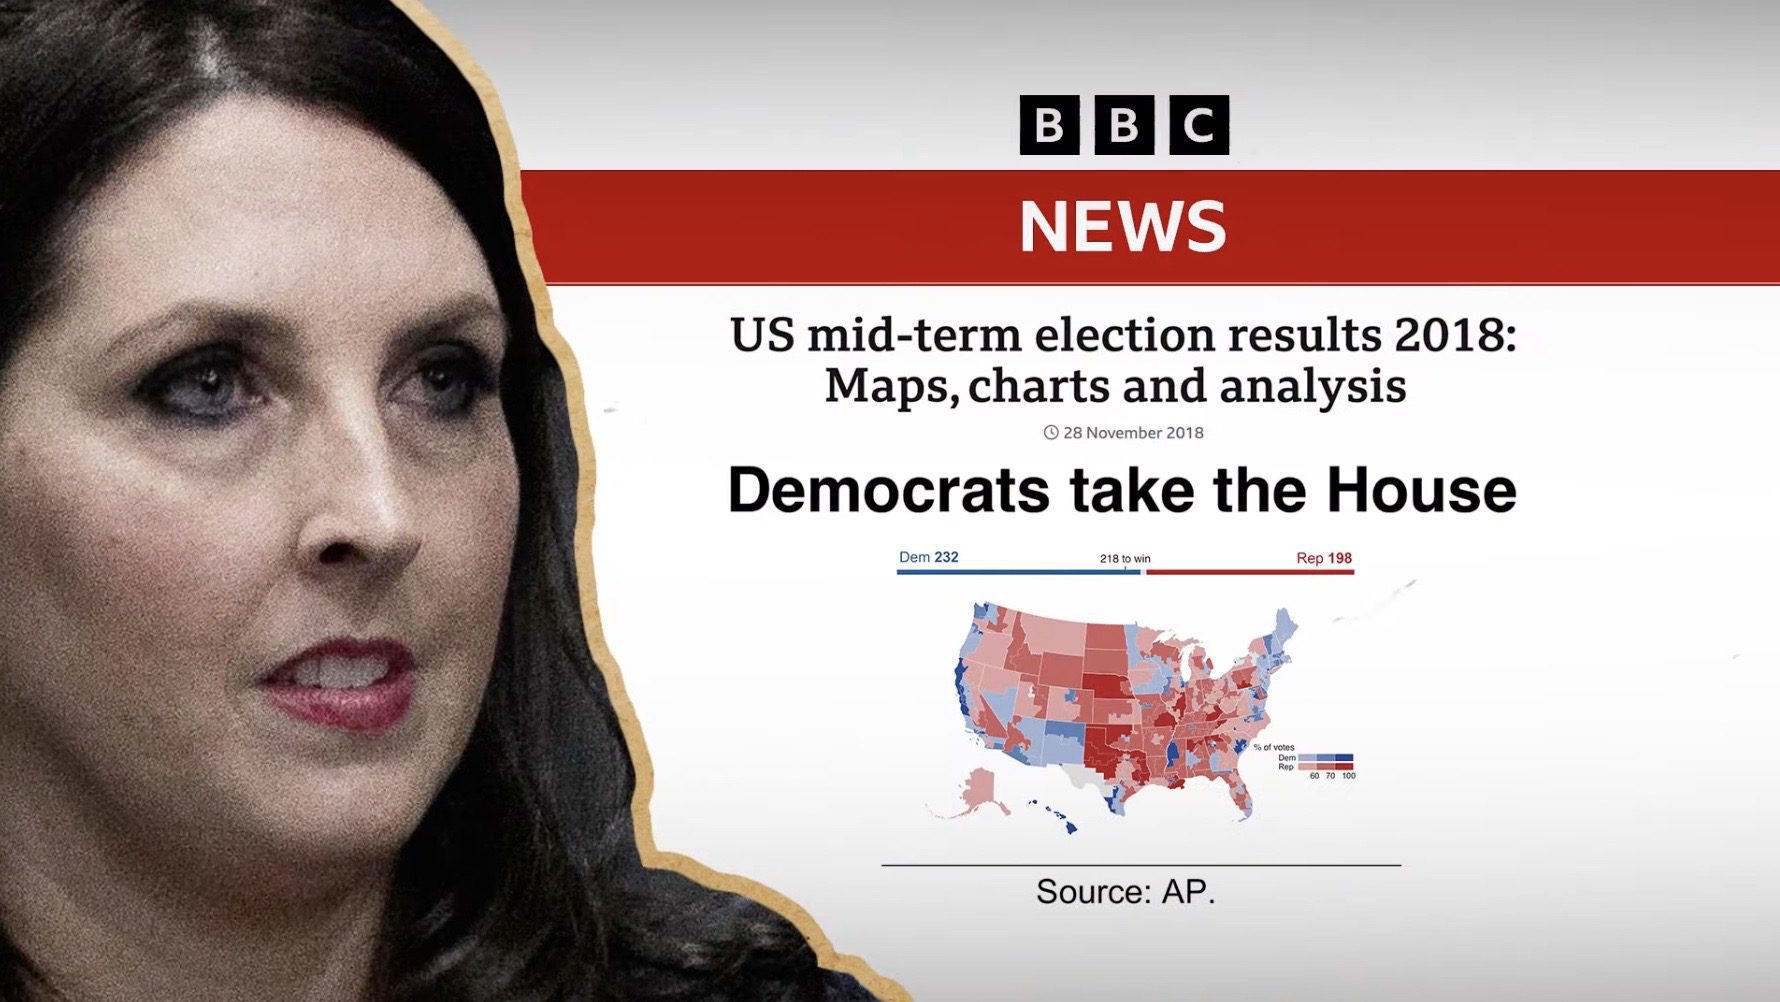 WATCH: KILLER Attack Ad Decimates Ronna Romney McDaniel for Her Horrific Record As RNC Chair and Spending Millions on Private Jets, Booze, Cosmetics – VOTE IS TOMORROW